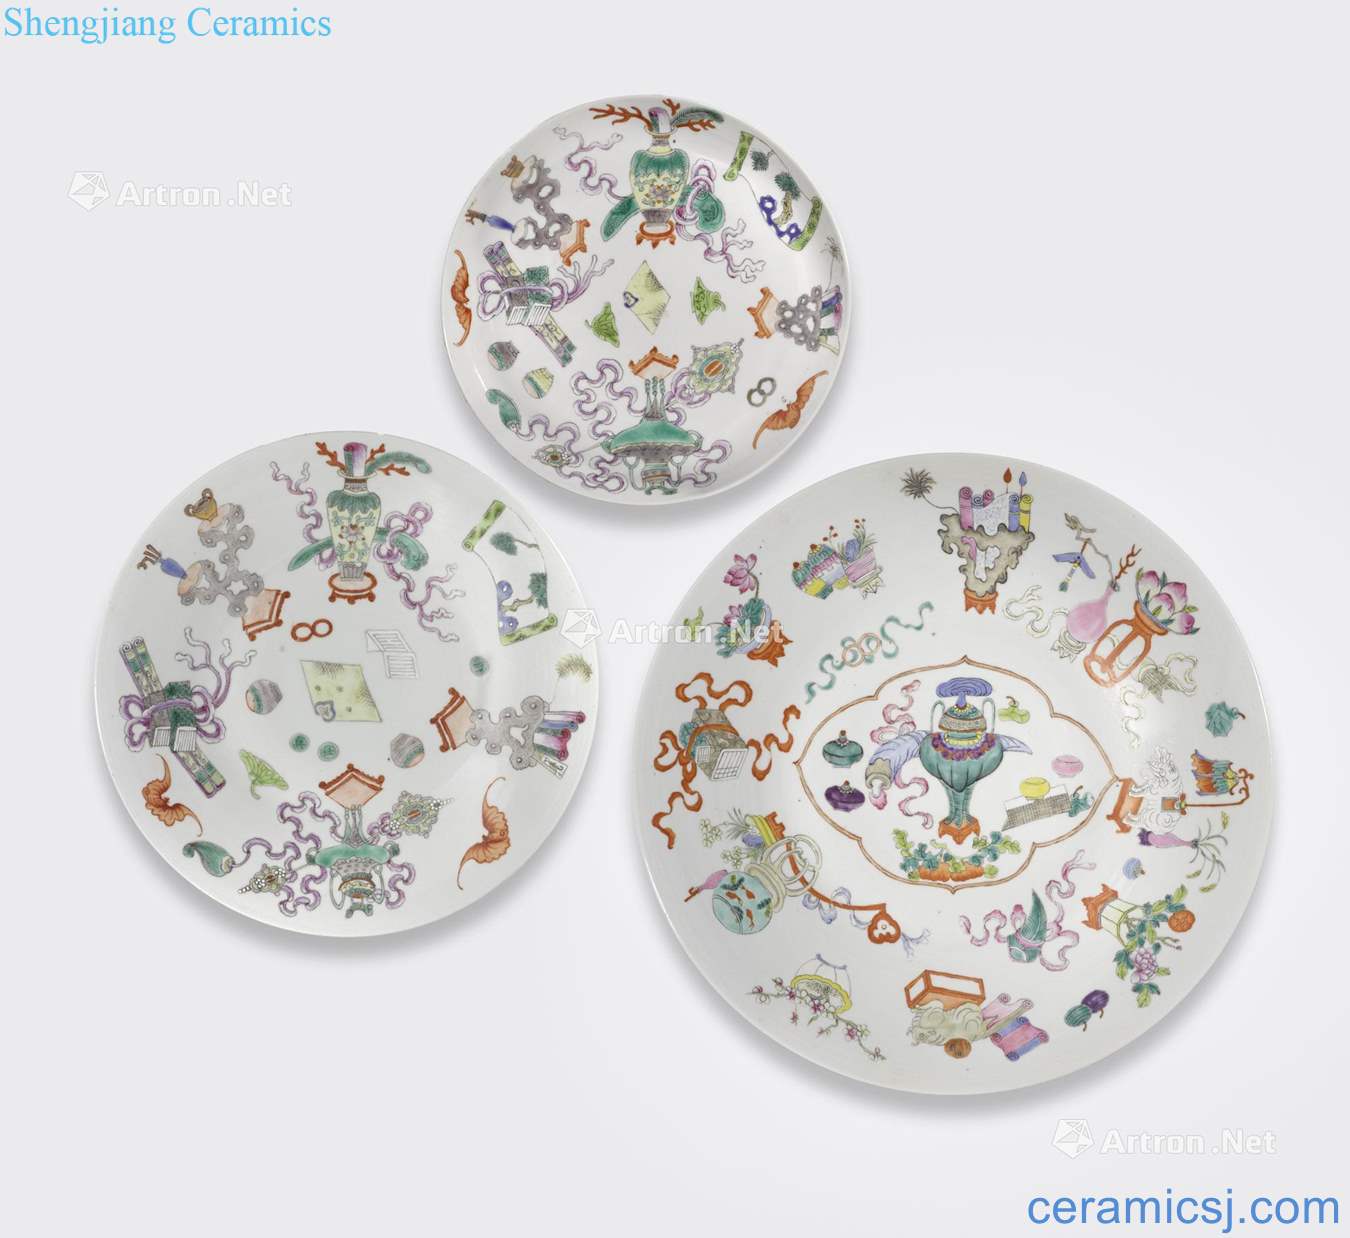 Jiaqing and Daoguang marks, newest the Qing/Republic period AN ASSEMBLED FAMILLE ROSE PARTIAL DINNER SERVICE